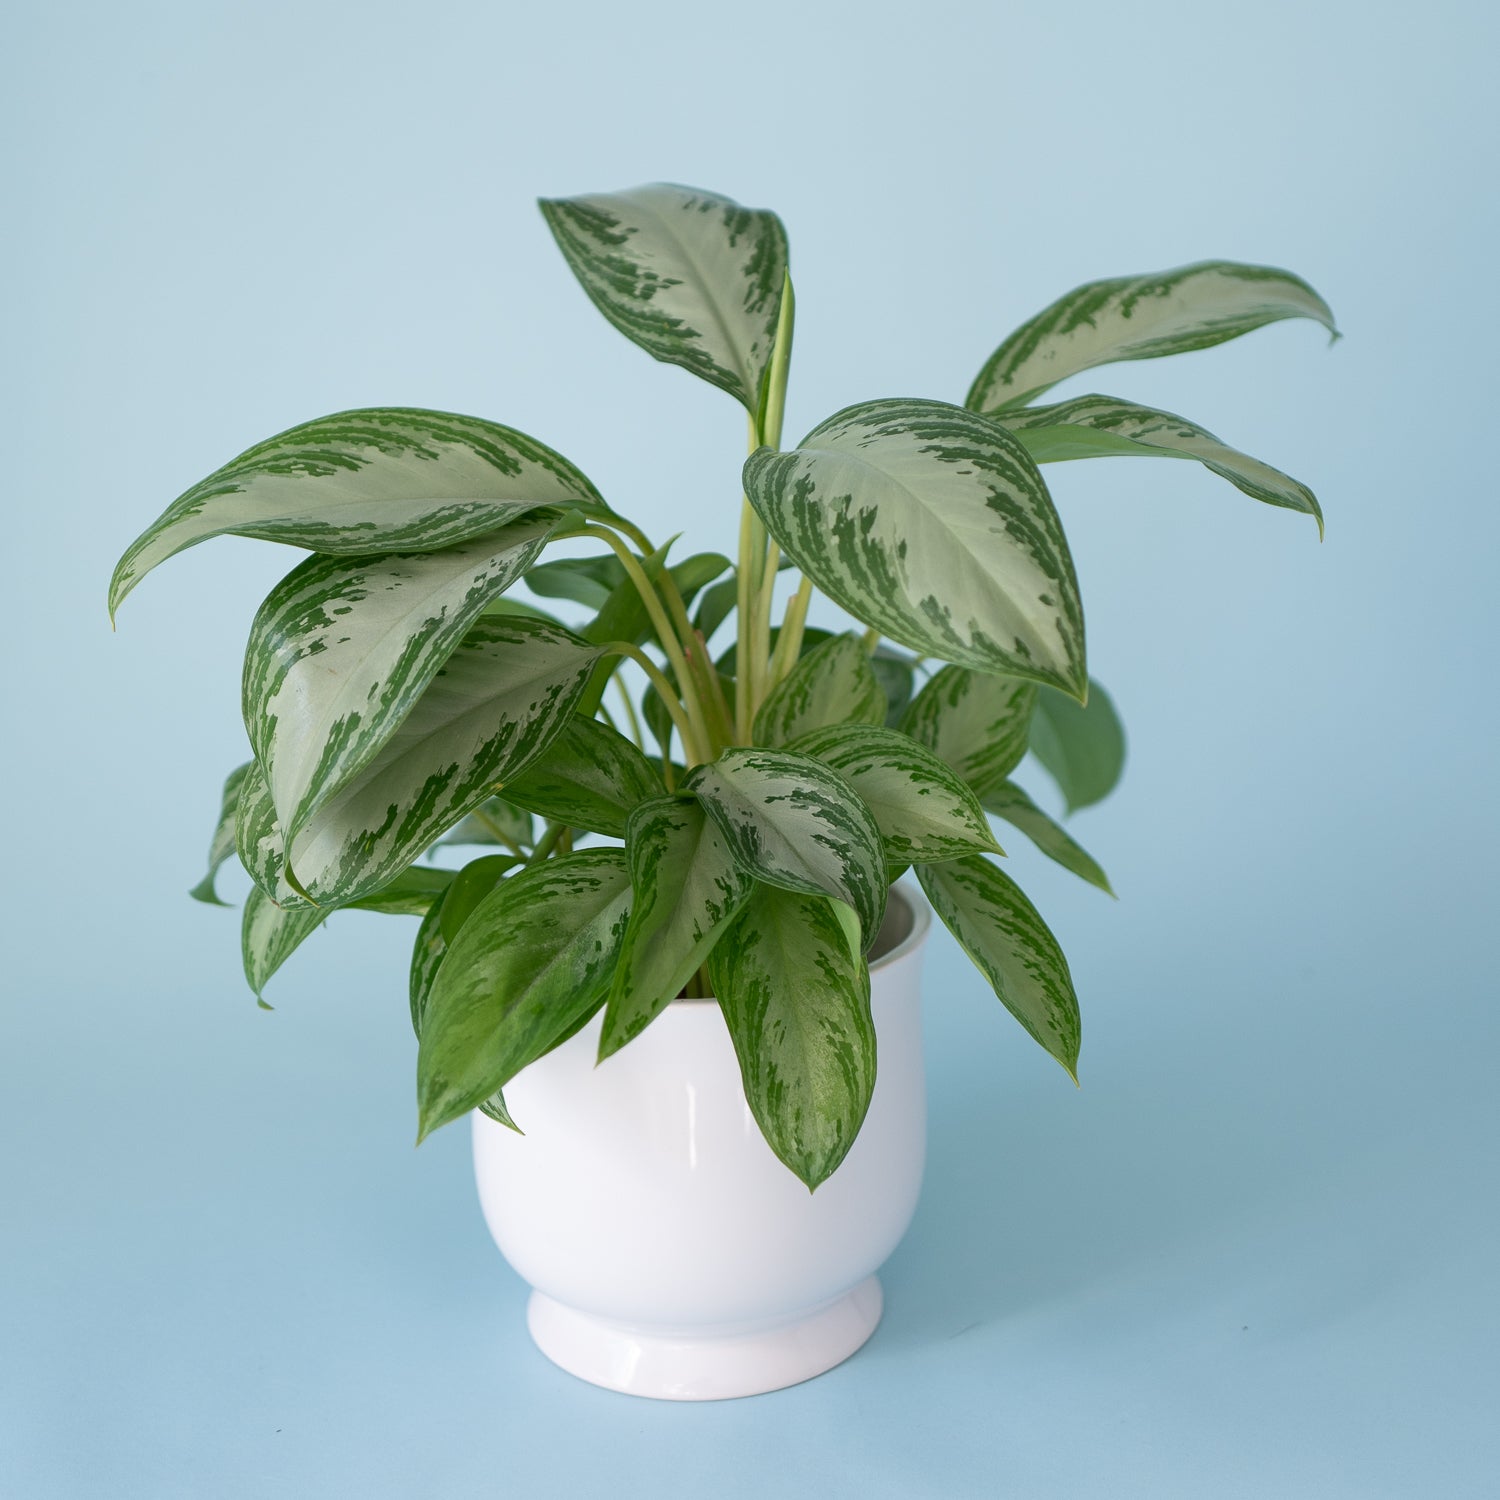 Chinese Evergreen plant has a 7 inch white ceramic catch pot.   Available for local delivery in Portland, Oregon. 